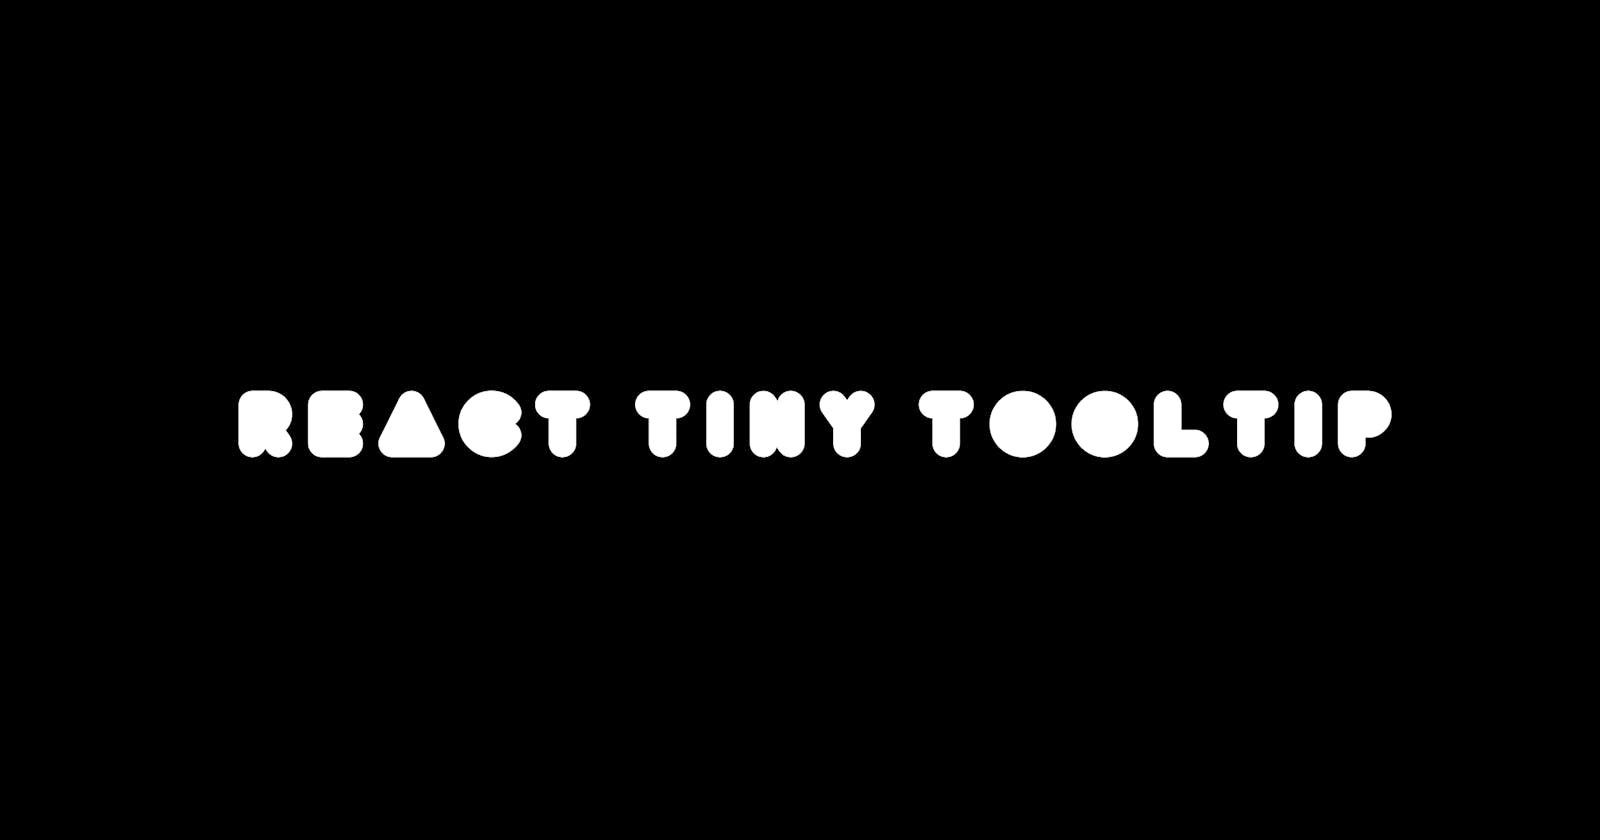 React tiny tooltip - a react library to create beautiful tooltips